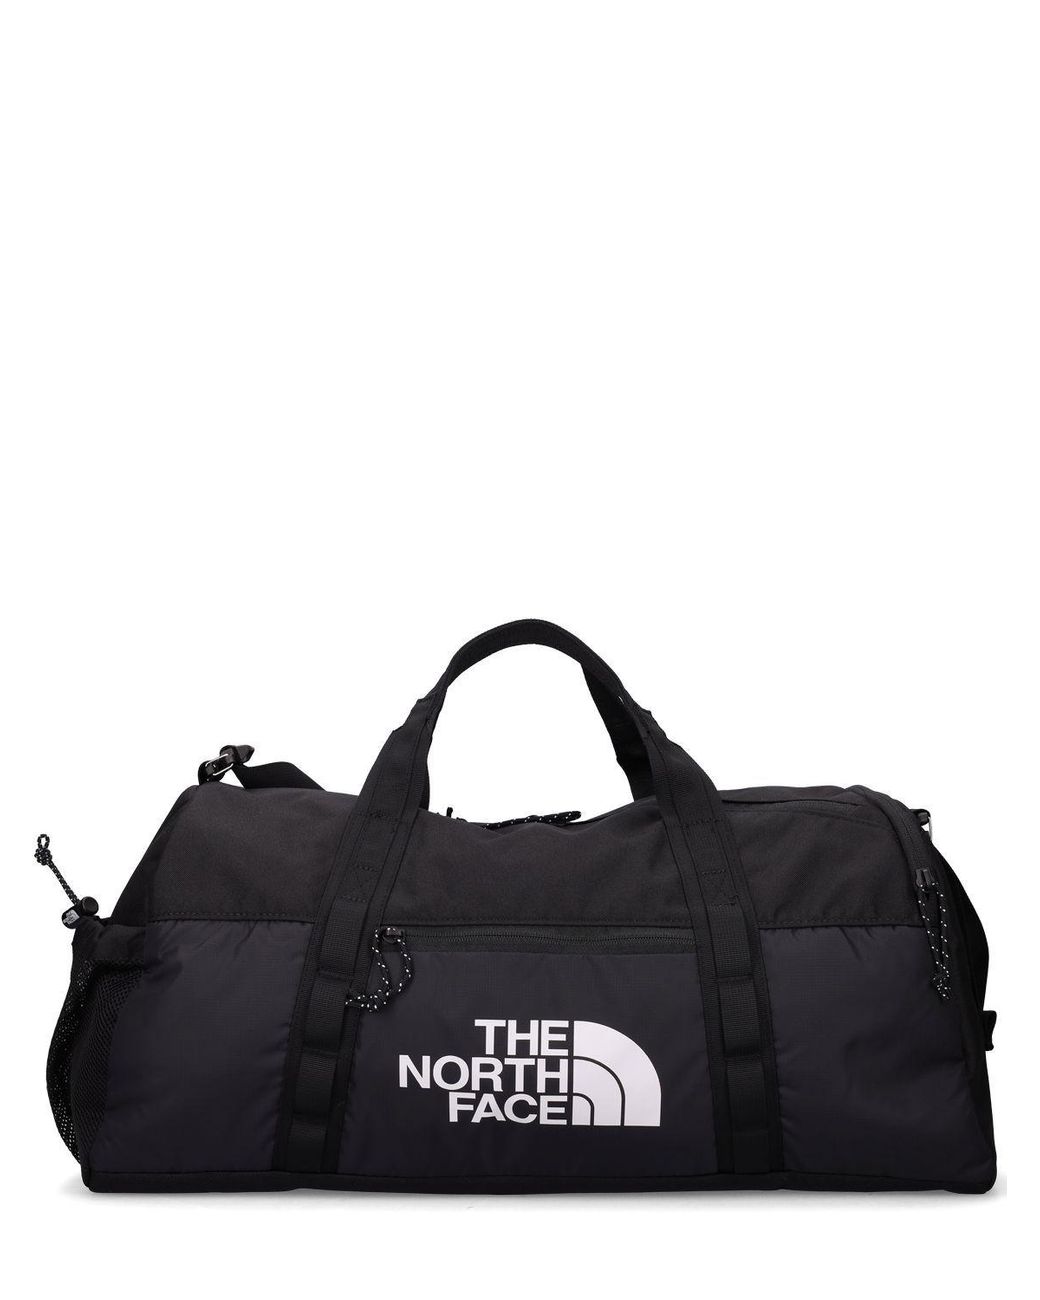 The North Face Bozer Duffle Bag in Black for Men | Lyst